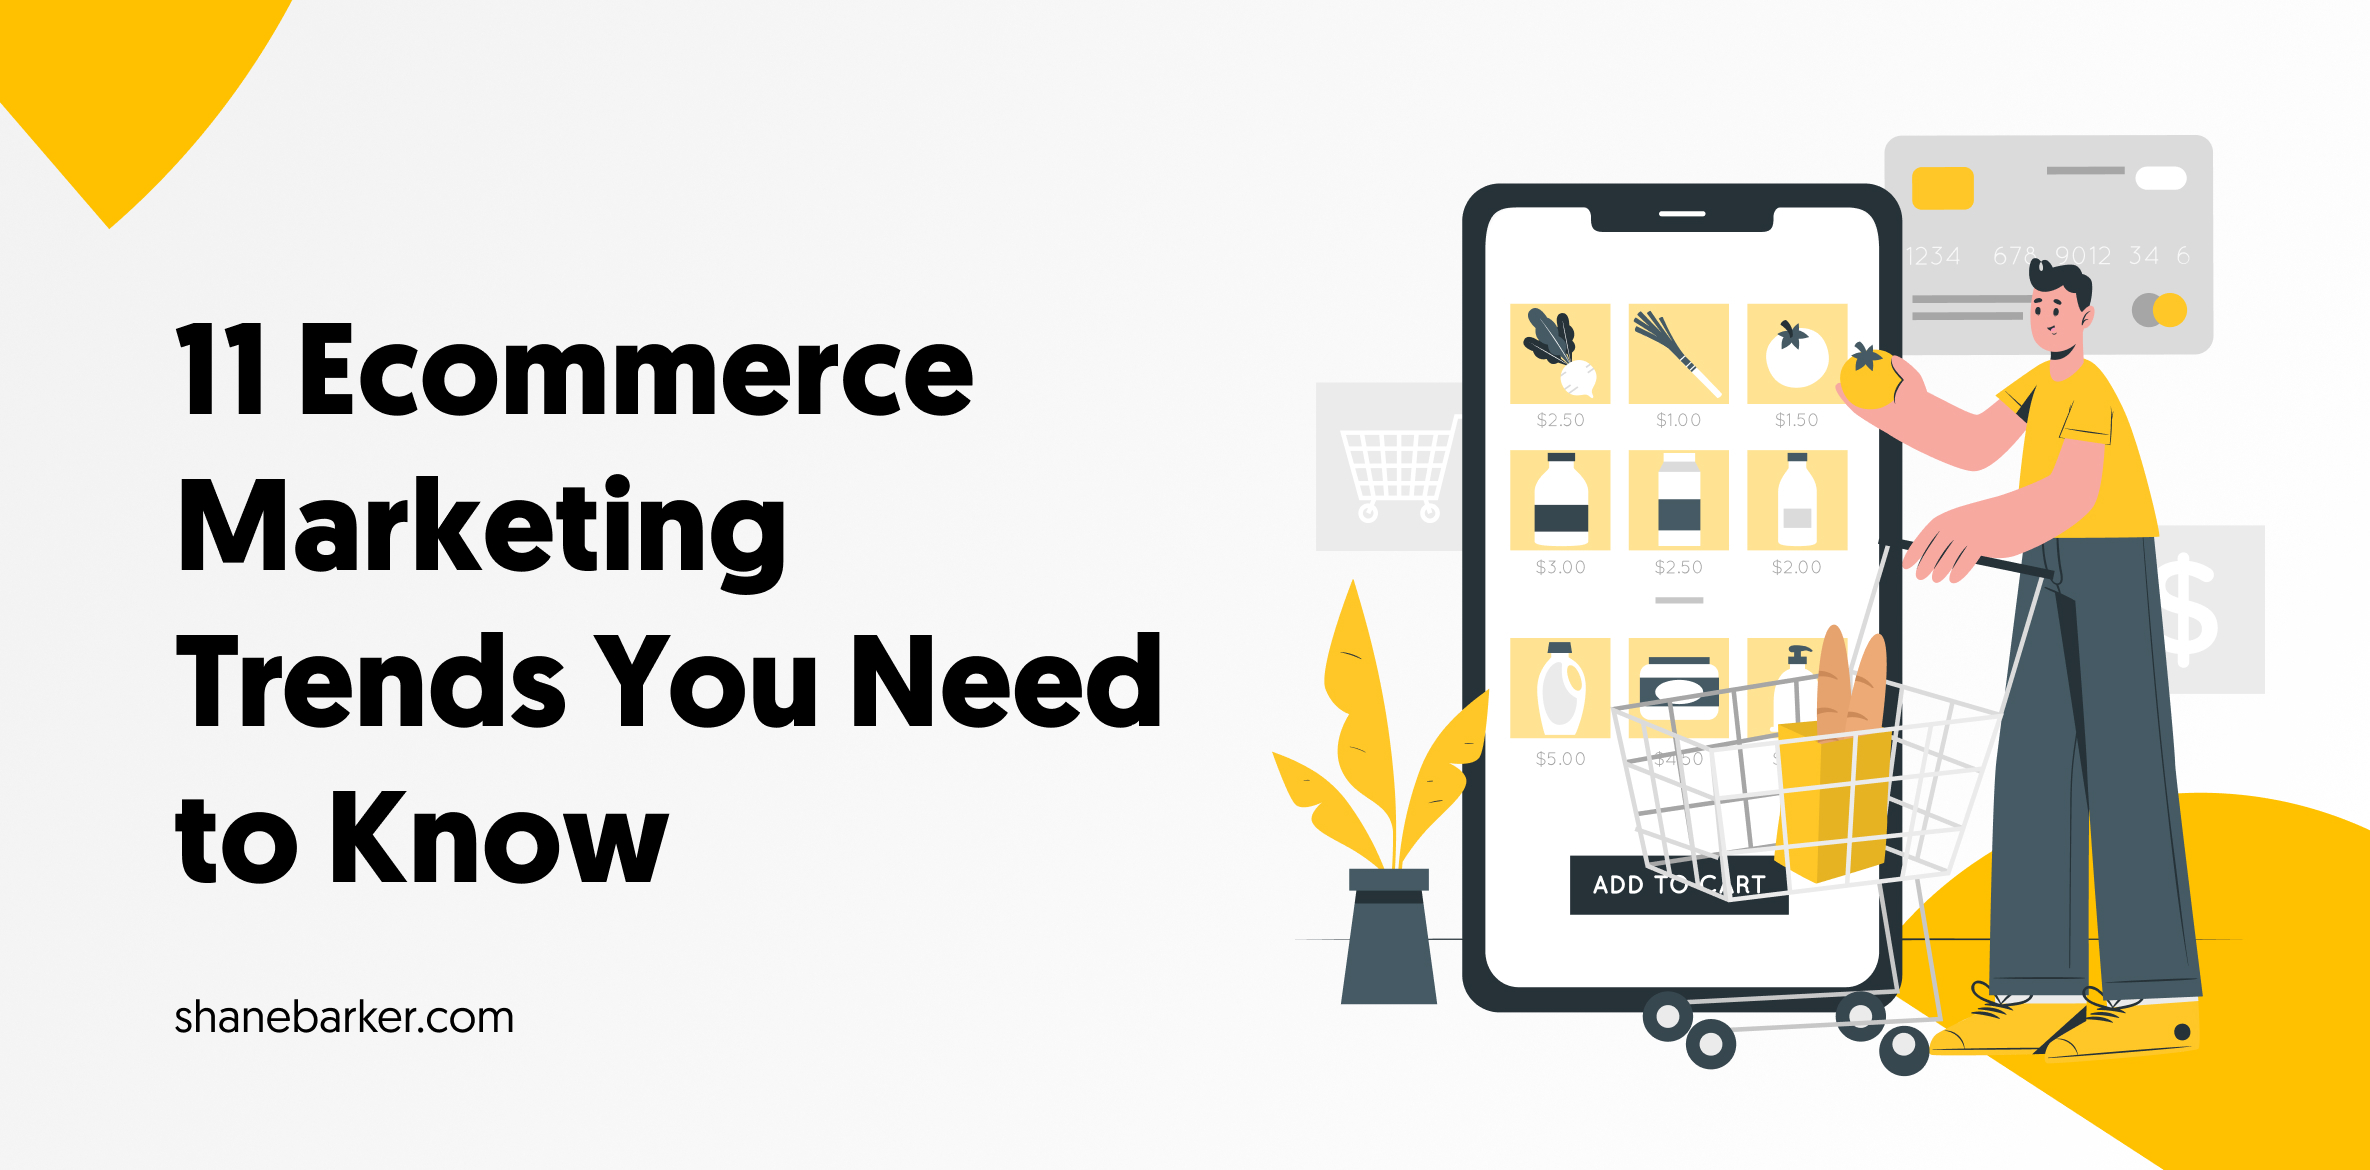 11 Ecommerce Marketing Trends You Need to Know